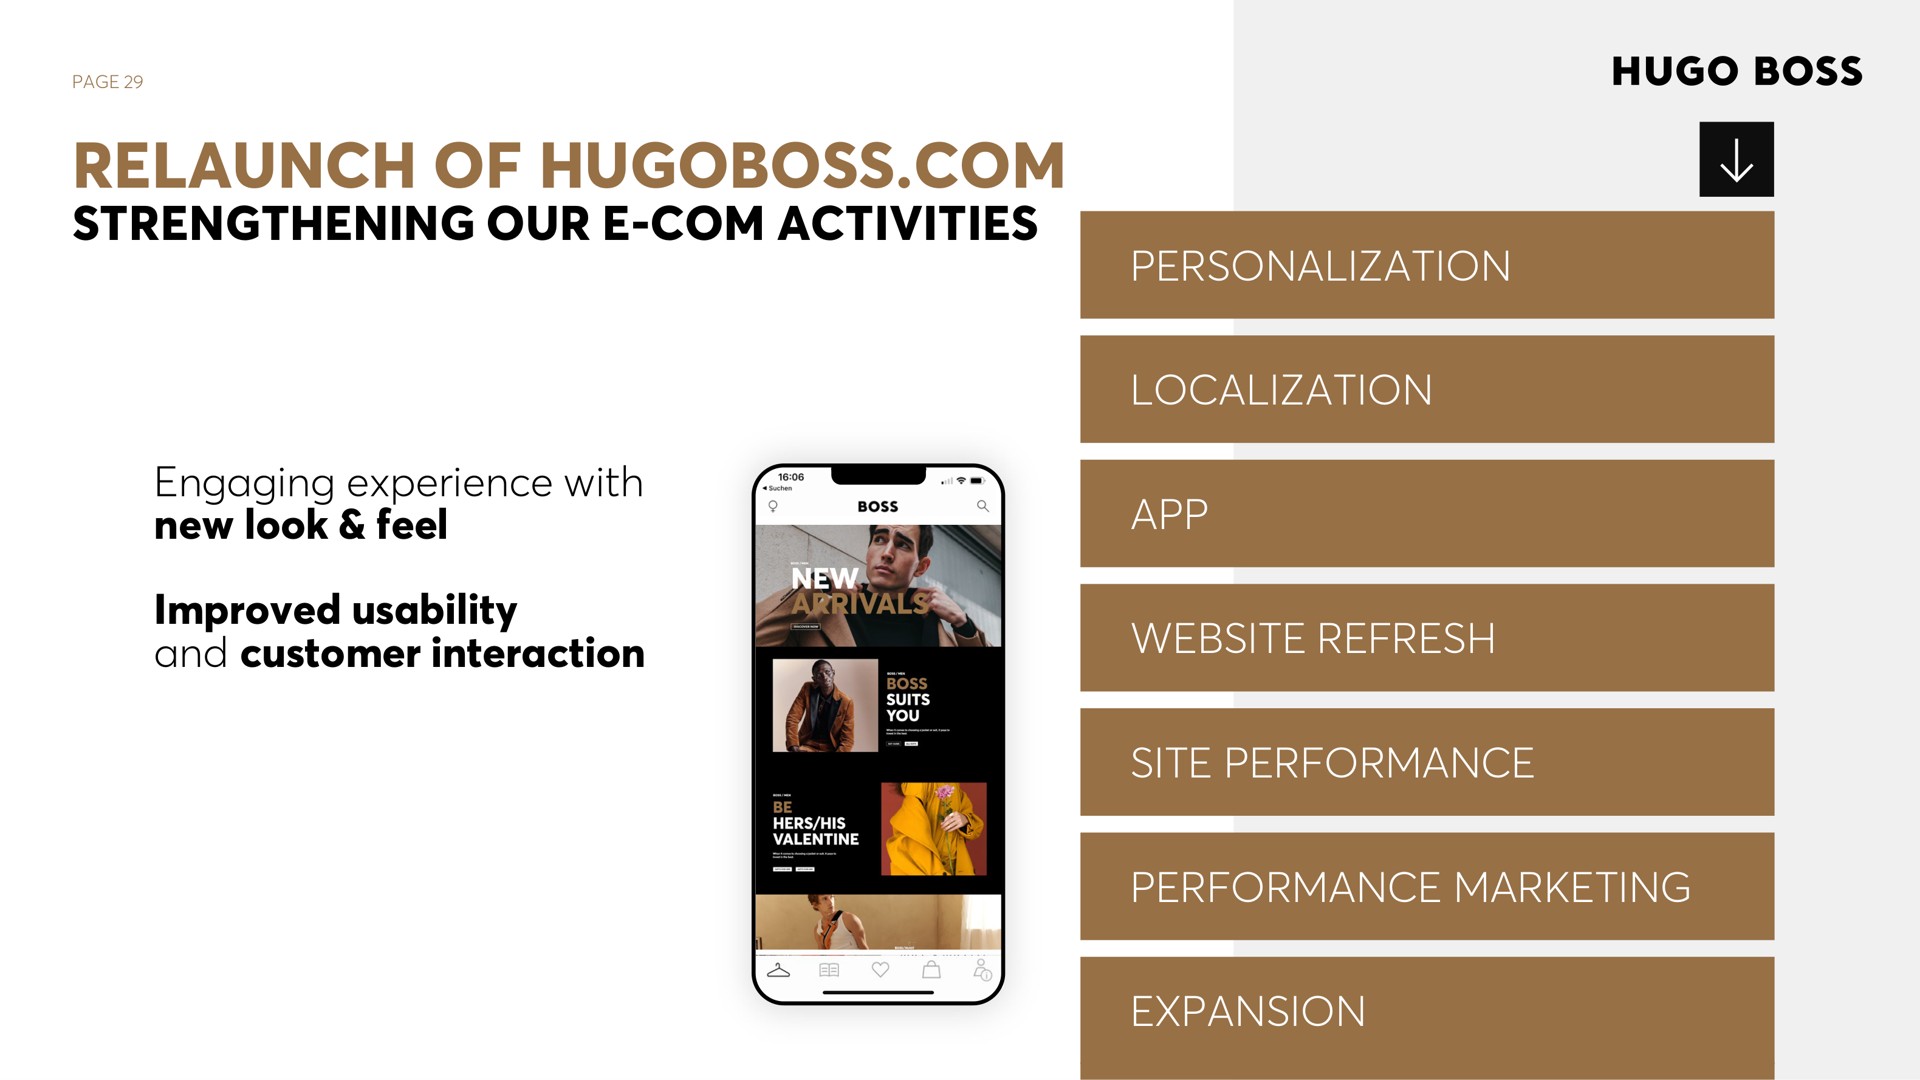 page relaunch of strengthening our activities engaging experience with new look feel improved usability and customer interaction personalization localization refresh site performance performance marketing expansion boss a | Hugo Boss